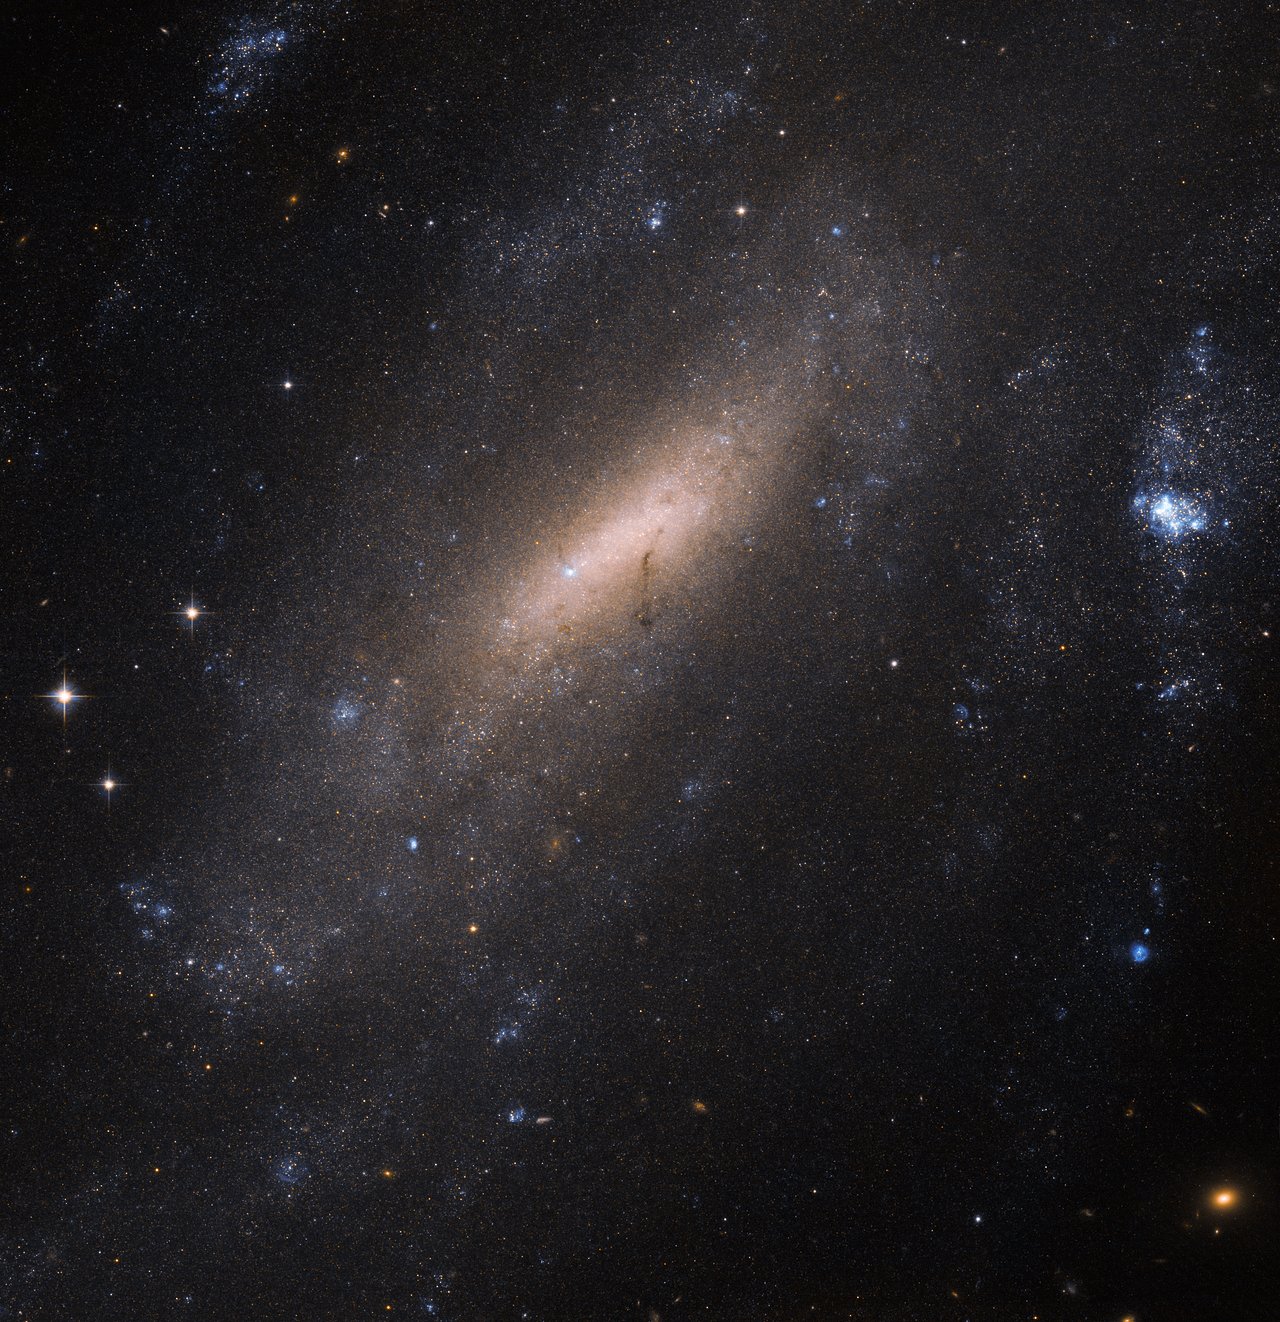 In 1900, astronomer Joseph Lunt made a discovery: Peering through a telescope at Cape Town Observatory, the British–South African scientist spotted this beautiful sight in the southern constellation of Grus (The Crane): a barred spiral galaxy now named IC 5201. Over a century later, the galaxy is still of interest to astronomers. For this image, the NASA/ESA Hubble Space Telescope used its Advanced Camera for Surveys (ACS) to produce a beautiful and intricate image of the galaxy. Hubble’s ACS can resolve individual stars within other galaxies, making it an invaluable tool to explore how various populations of stars have sprung to life, evolved, and died throughout the cosmos. IC 5201 sits over 40 million light-years away from us. As with two thirds of all the spirals we see in the Universe — including the Milky Way, the galaxy has a bar of stars slicing through its centre.